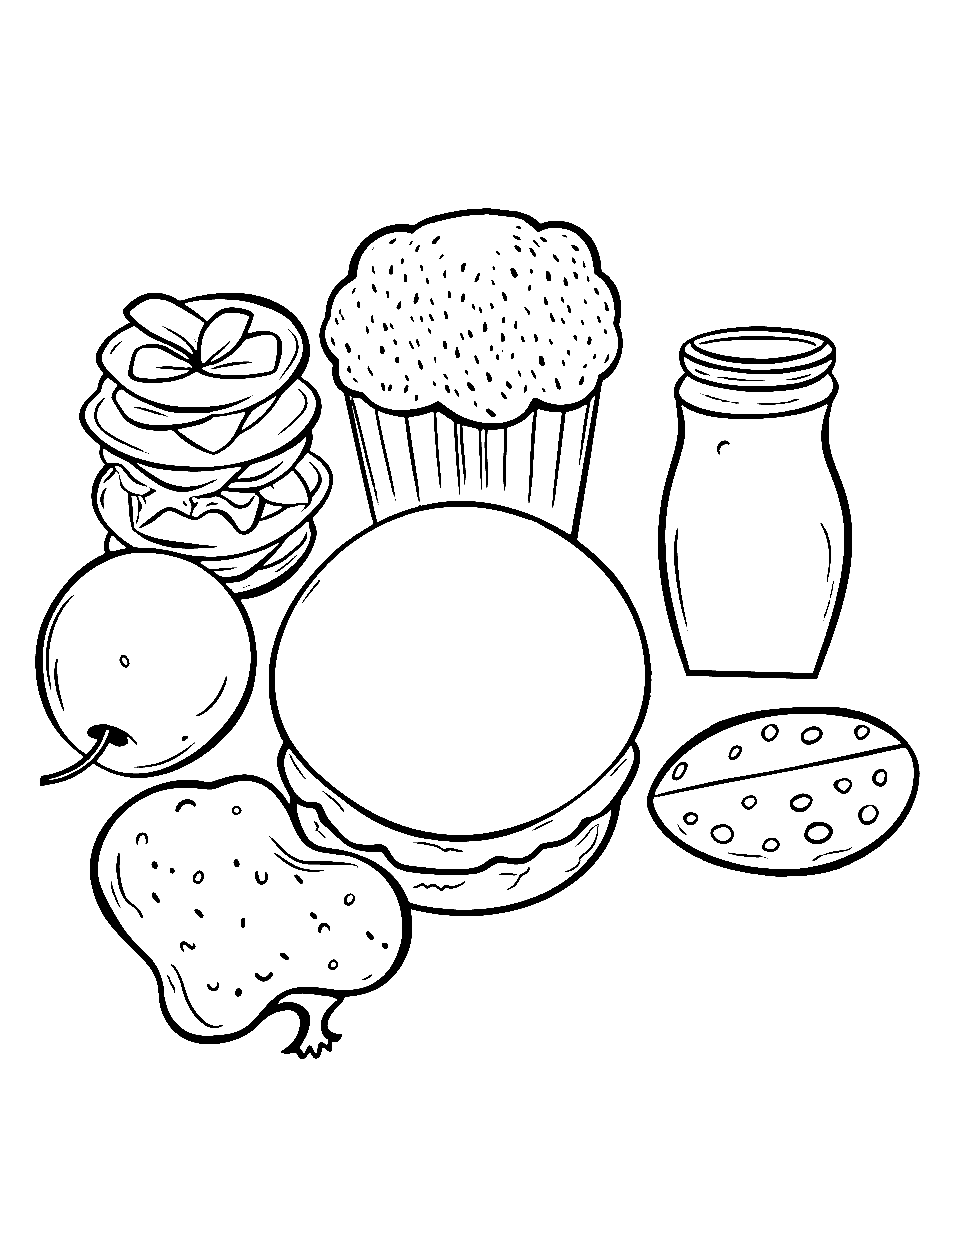 Drawing Doodles Meal Food Coloring Page - Hand-drawn doodles of a complete meal from drink to dessert.